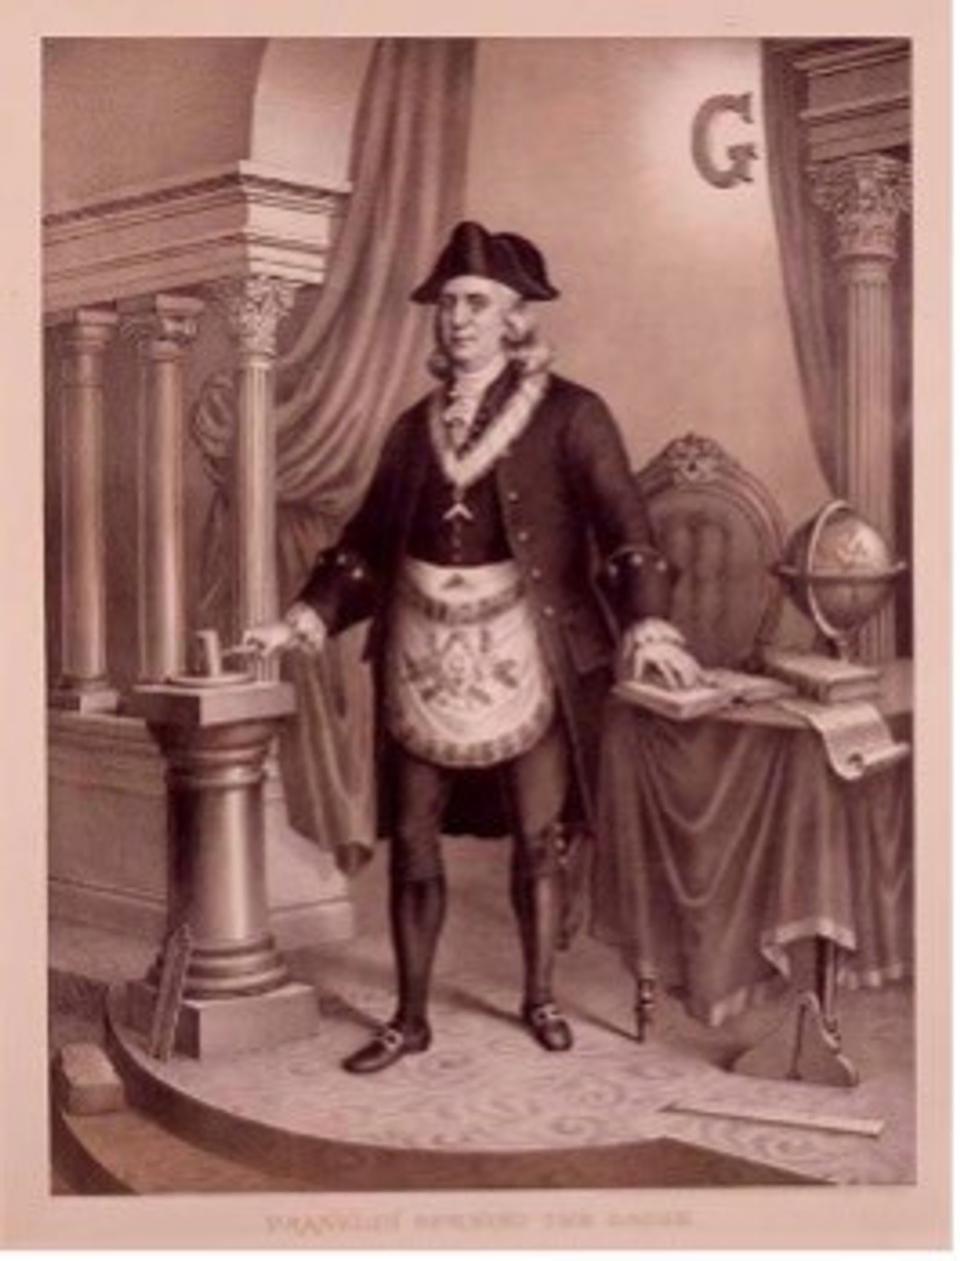 A print depicting Franklin wearing a Masonic apron, standing in a lodge room.